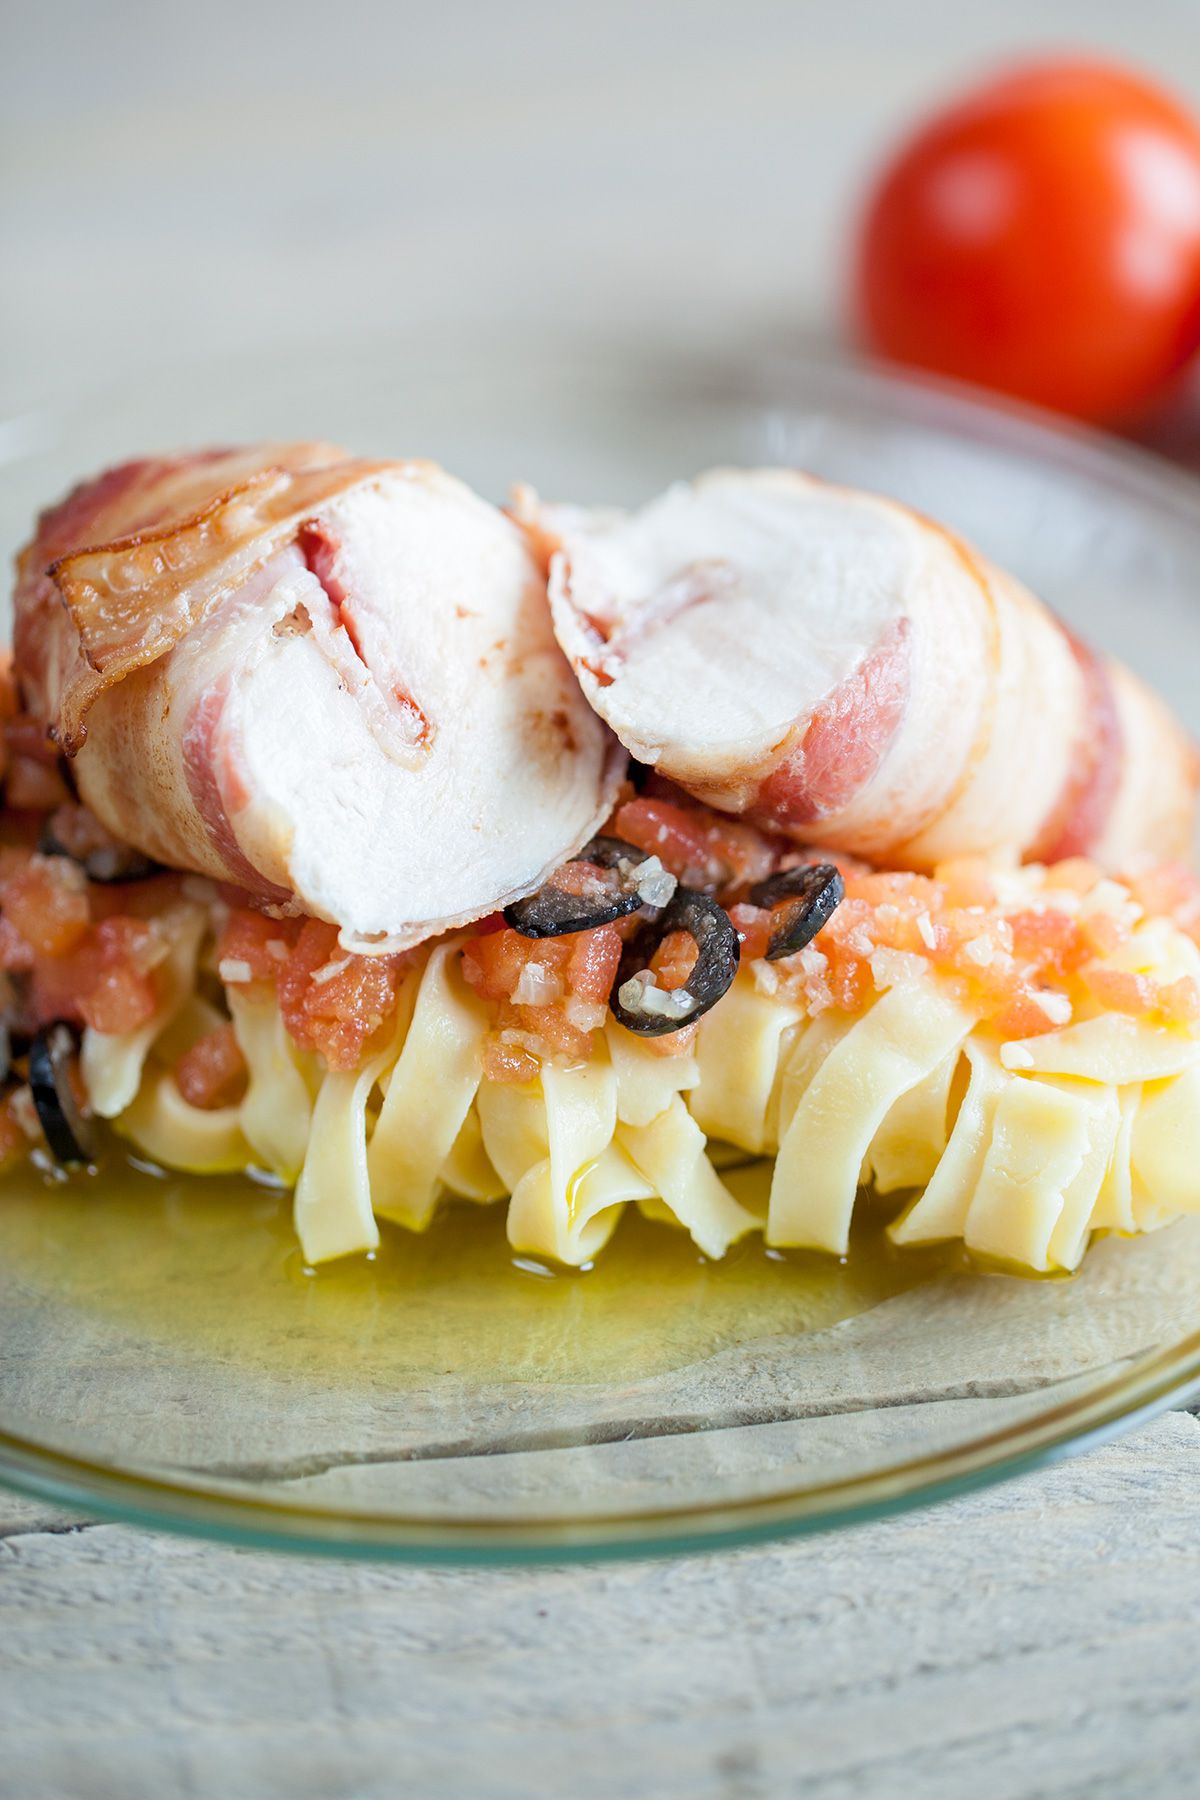 Home-made pasta with bacon wrapped chicken